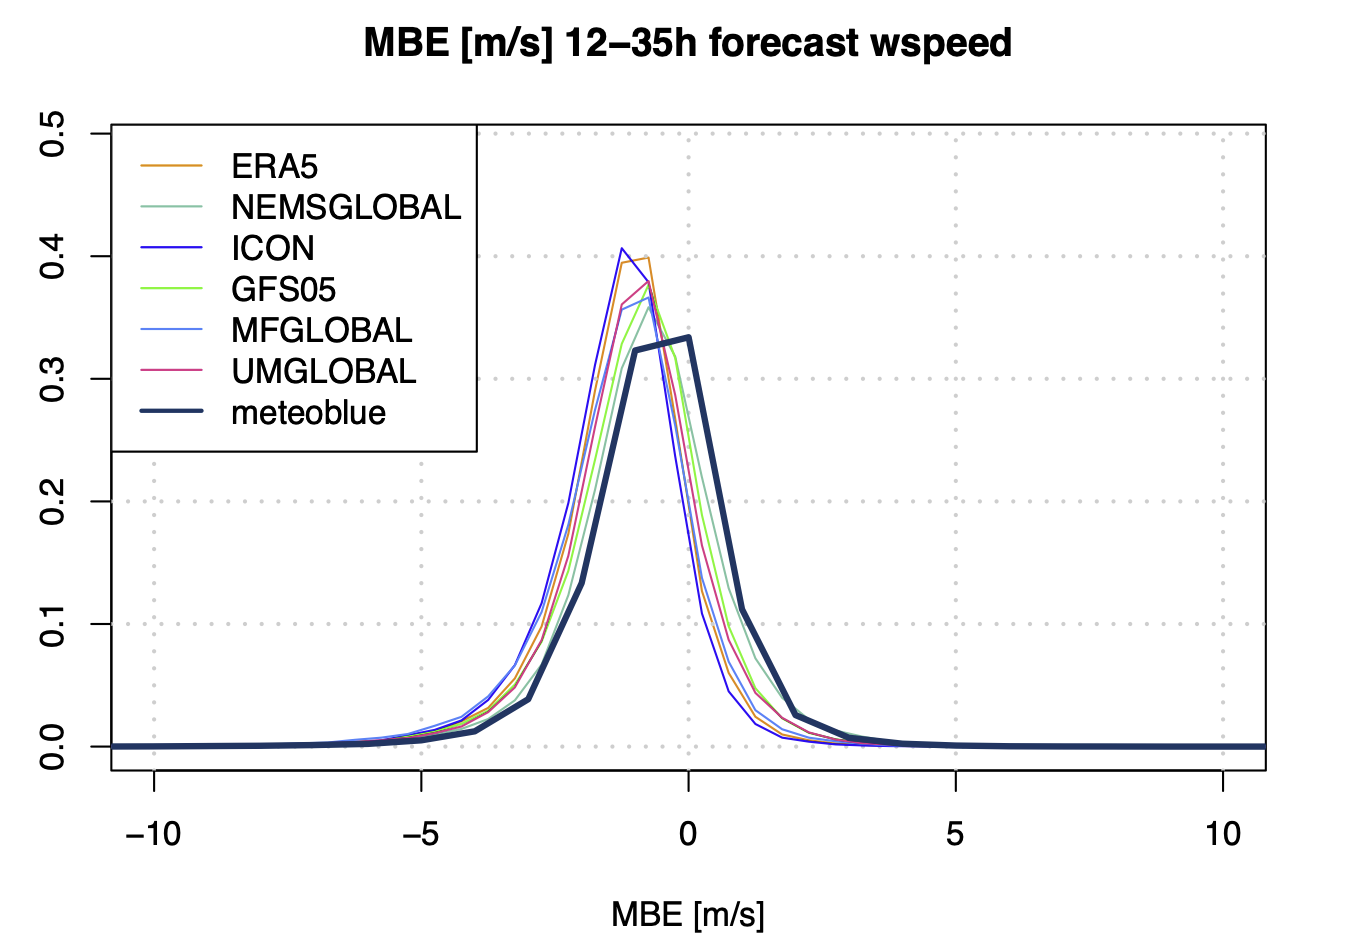 Density plot of the MBE of different forecast models and the reanalysis model ERA5 as well as the meteoblue forecast and hourly
measurements of more than 450 global stations of the year 2021.